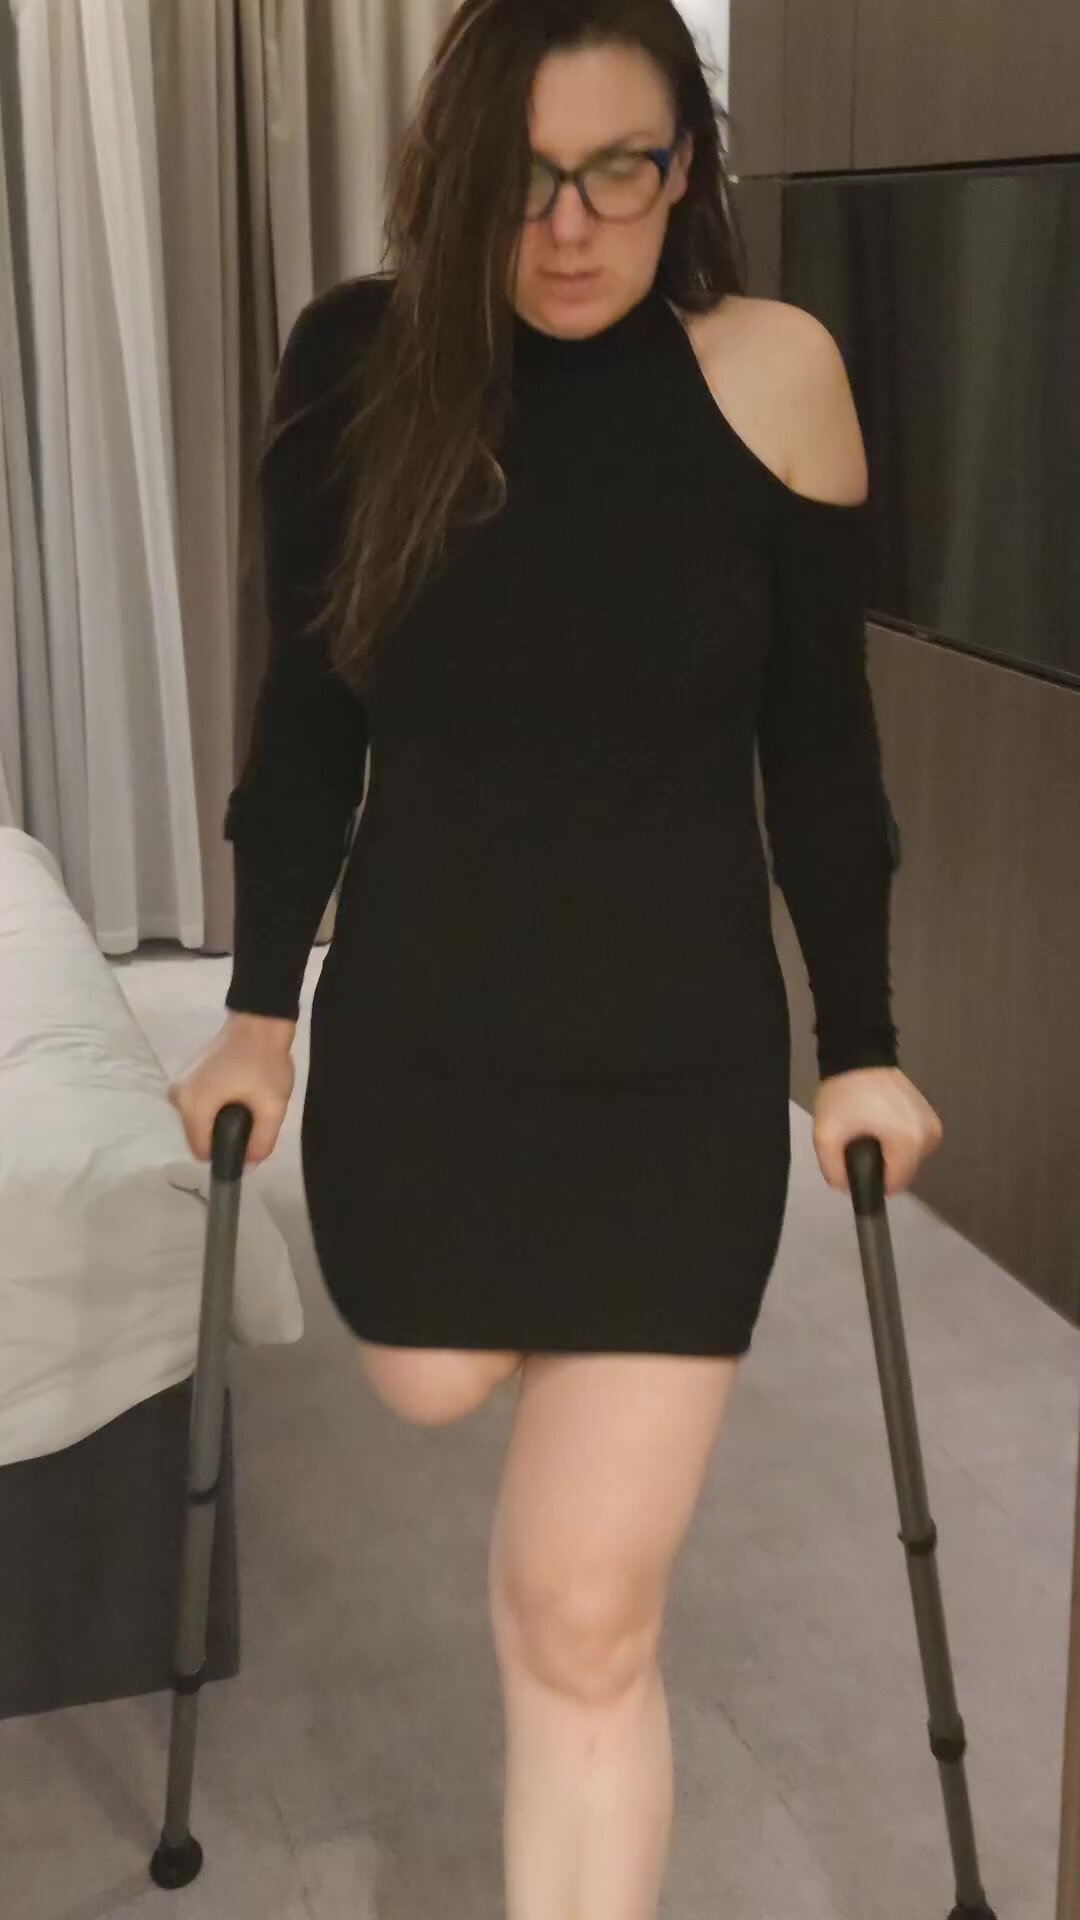 Amputee girl in crutches - video 3